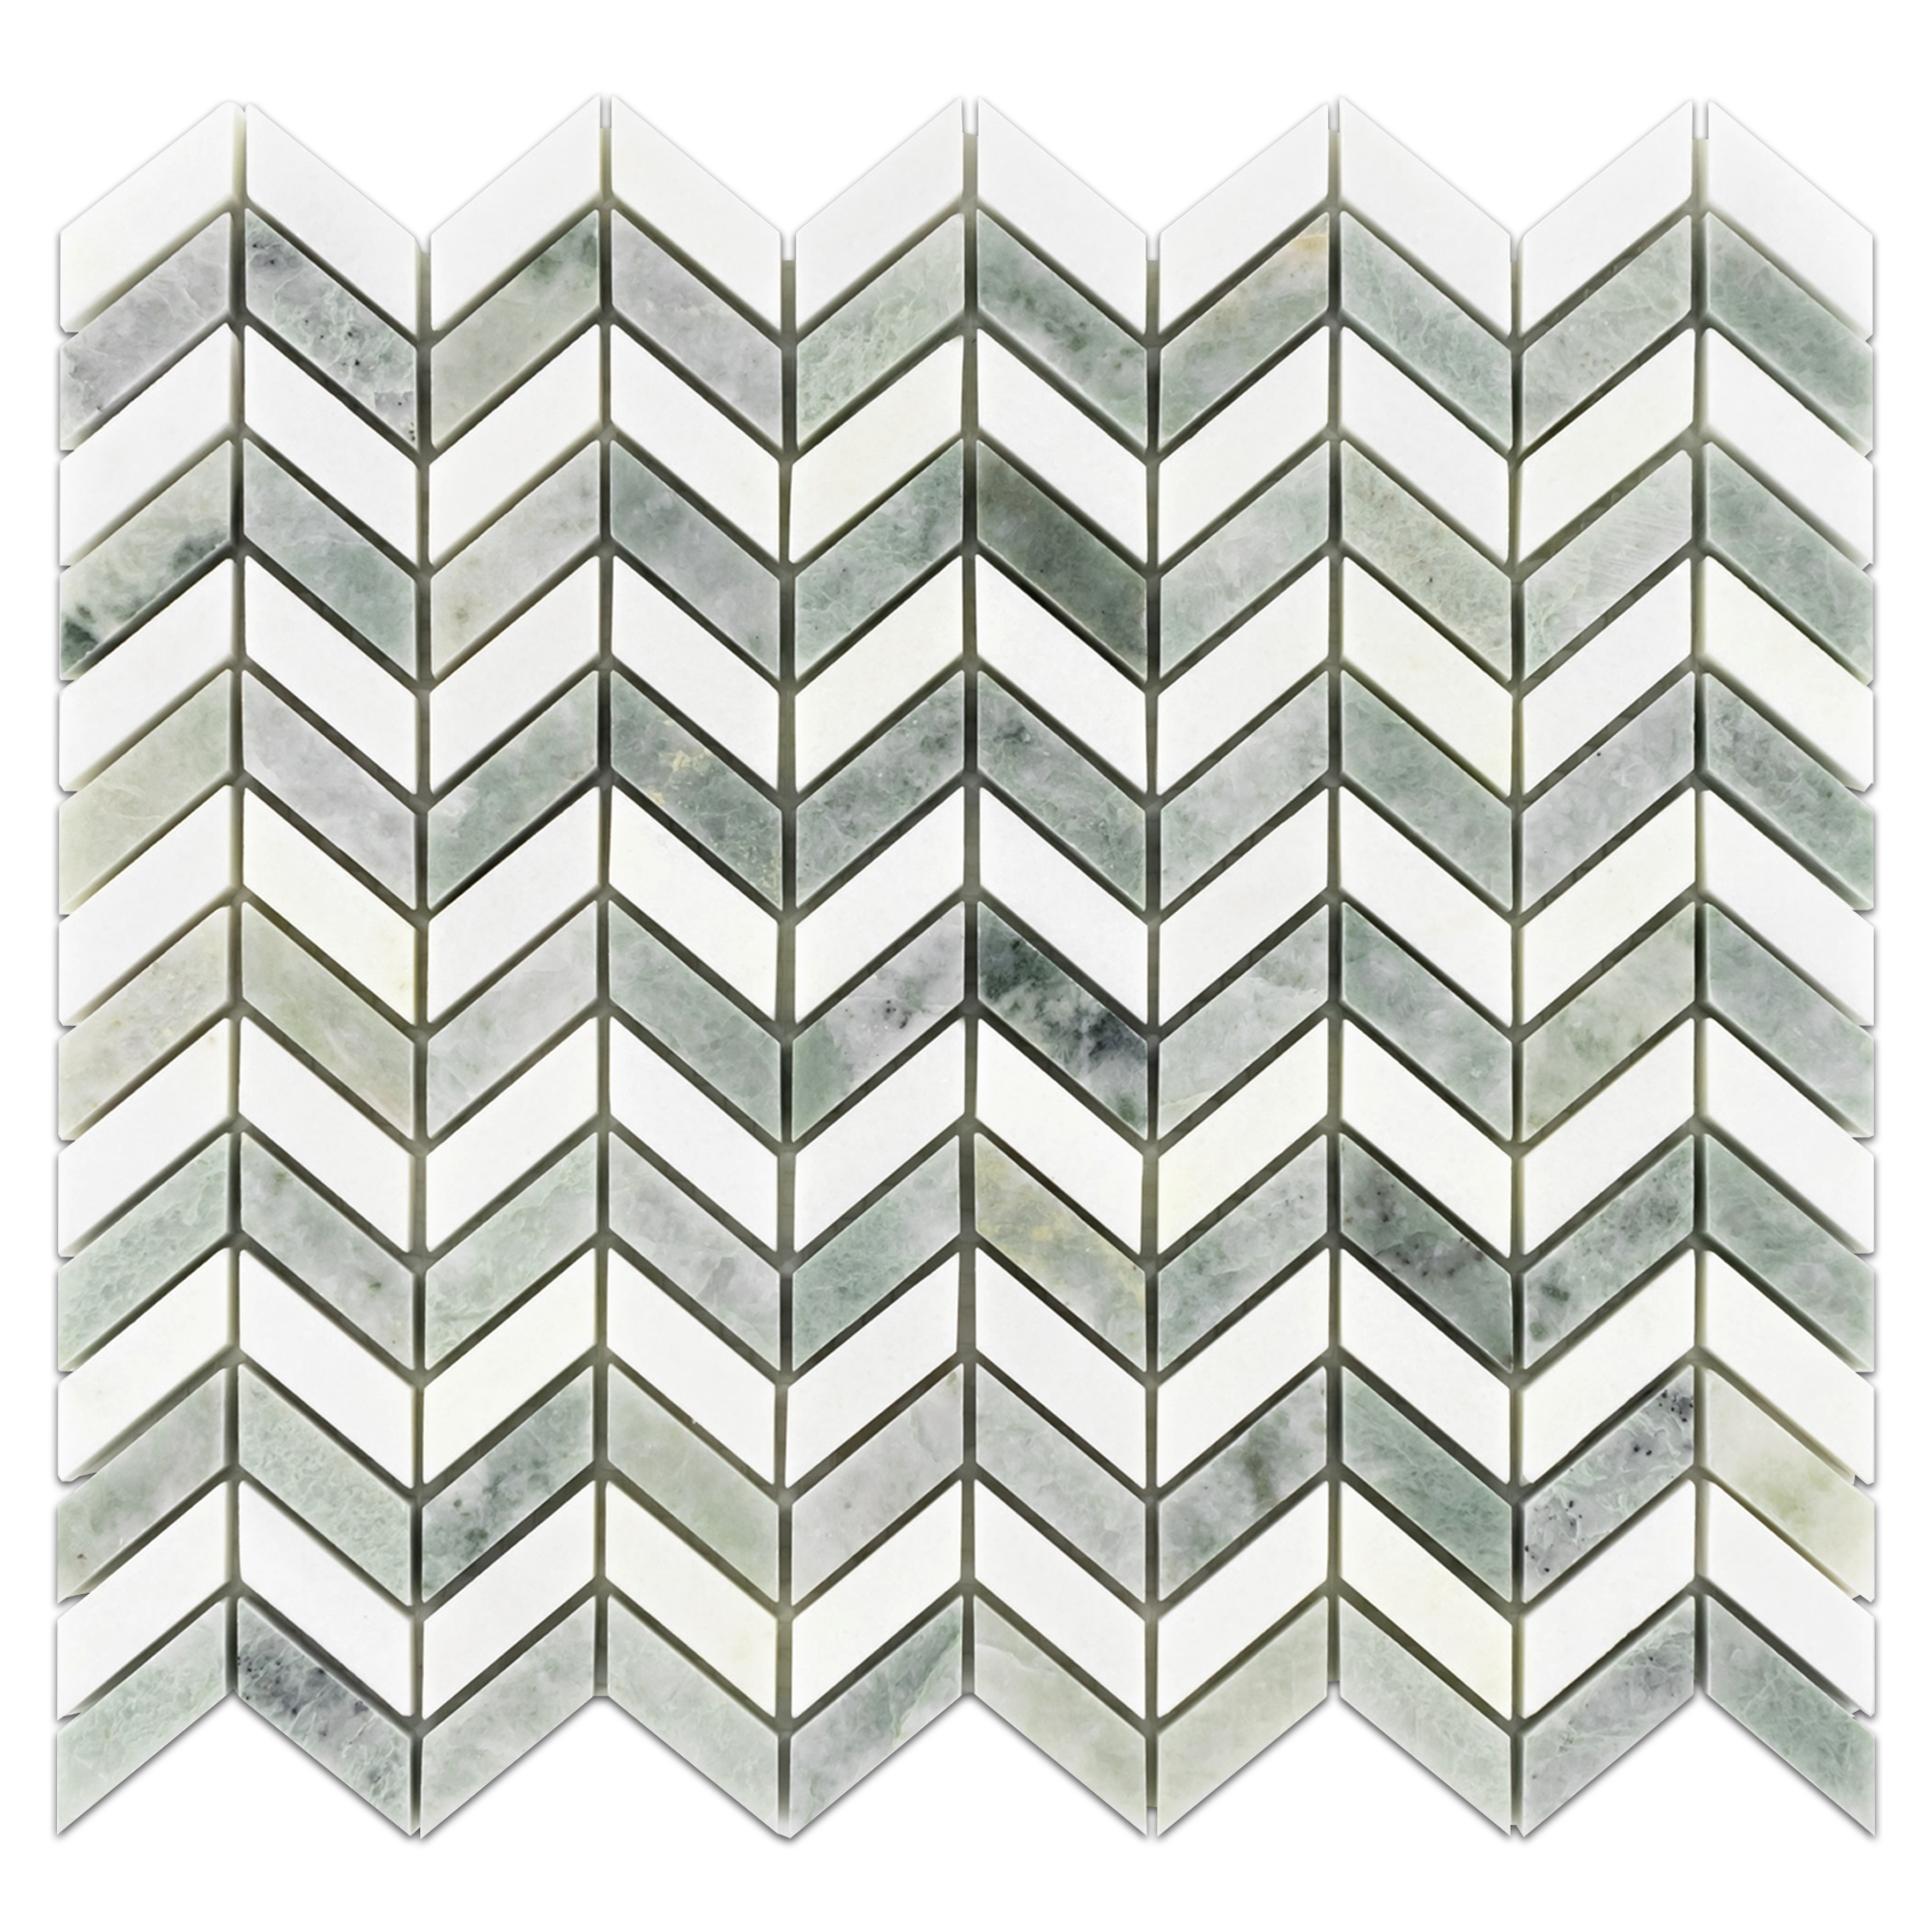 Elon Ming Green White Thassos Marble Stone Blend Chevron Field Mosaic 11.5x12.1875x0.375 Polished AM1172P Surface Group International Product